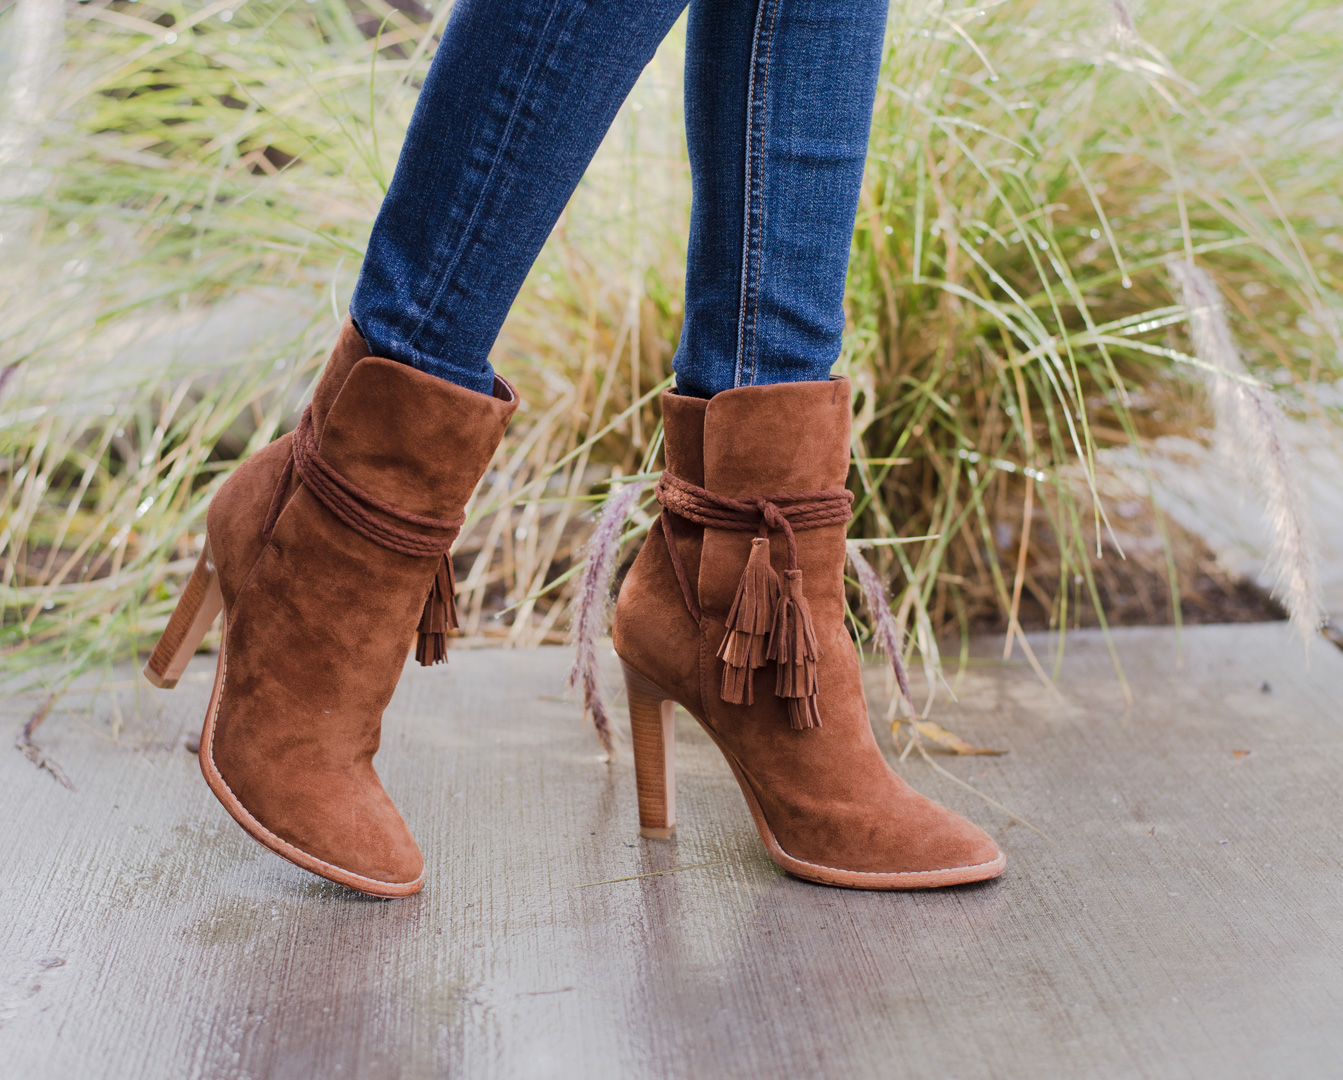 Jackie Roque styling the Joie Chap suede bootie in brown.